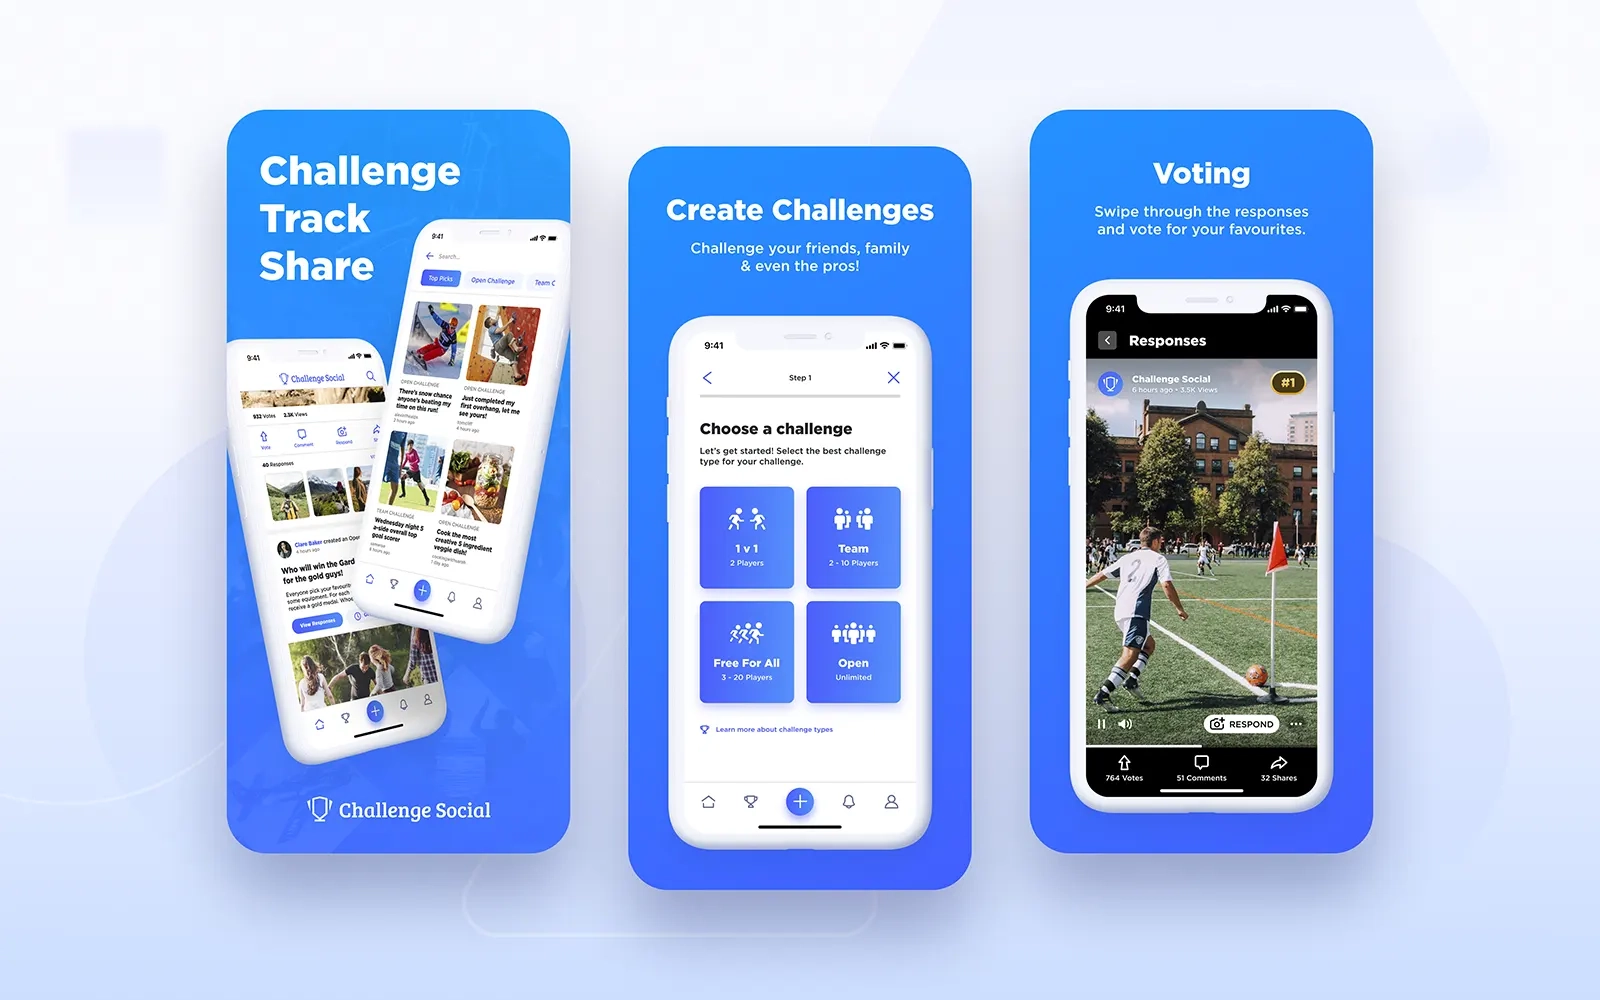 Three App Store screenshots showing the newsfeed, create challenge and response section screens